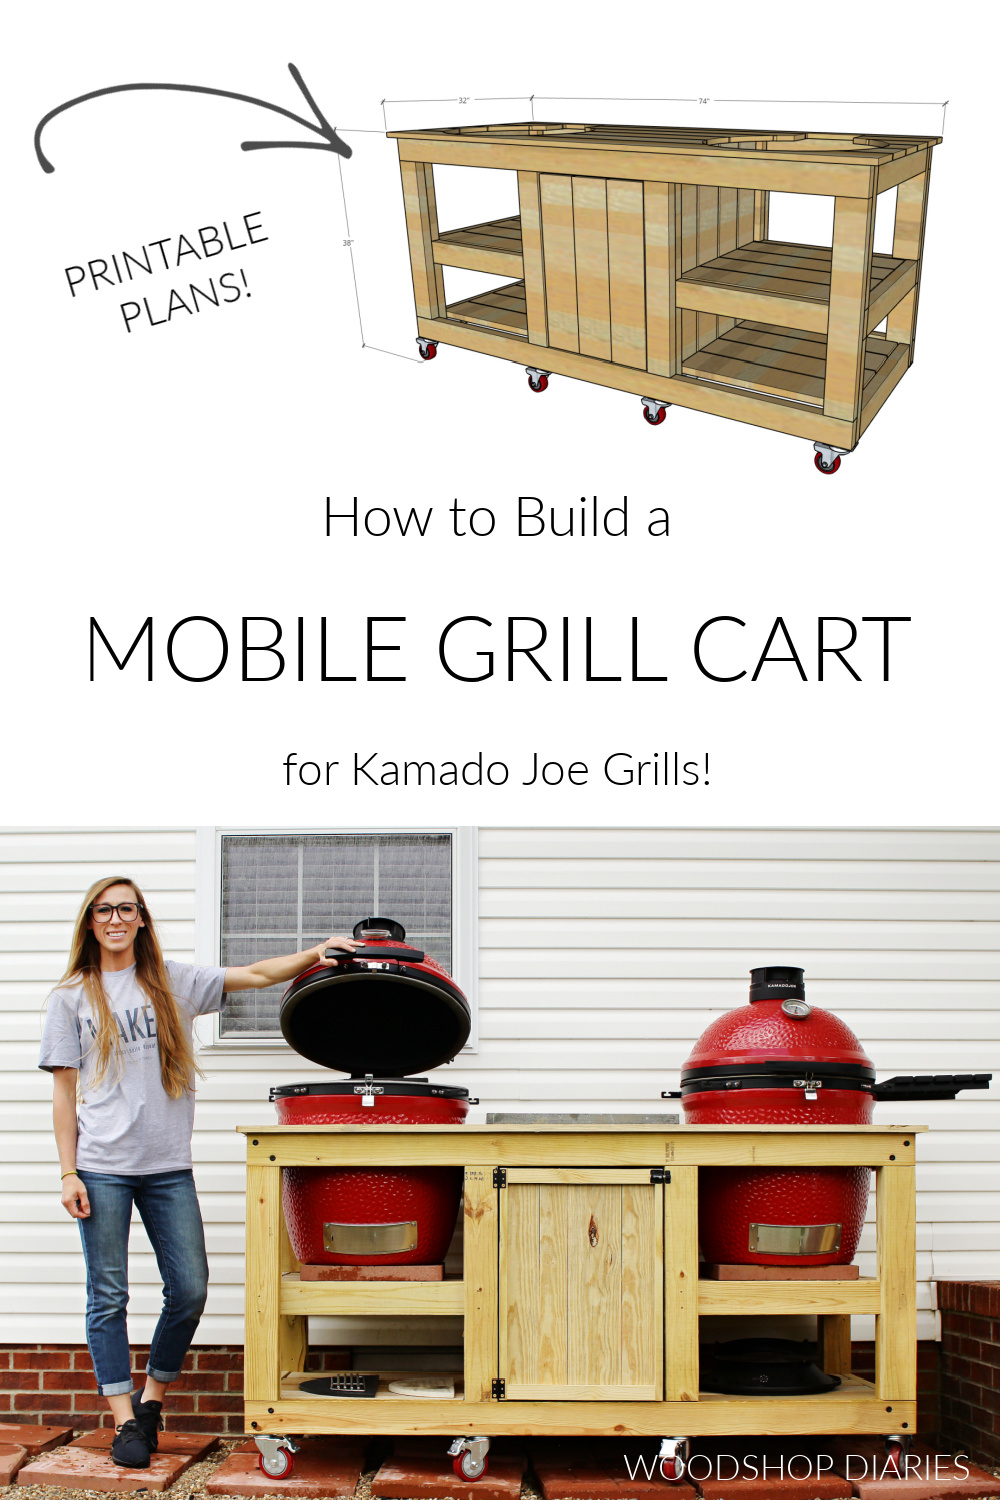 Pinterest collage image showing overall dimensional diagram at top and Shara holding lid of Kamado Joe grill on mobile cart open at bottom with text "how to build a mobile grill cart"